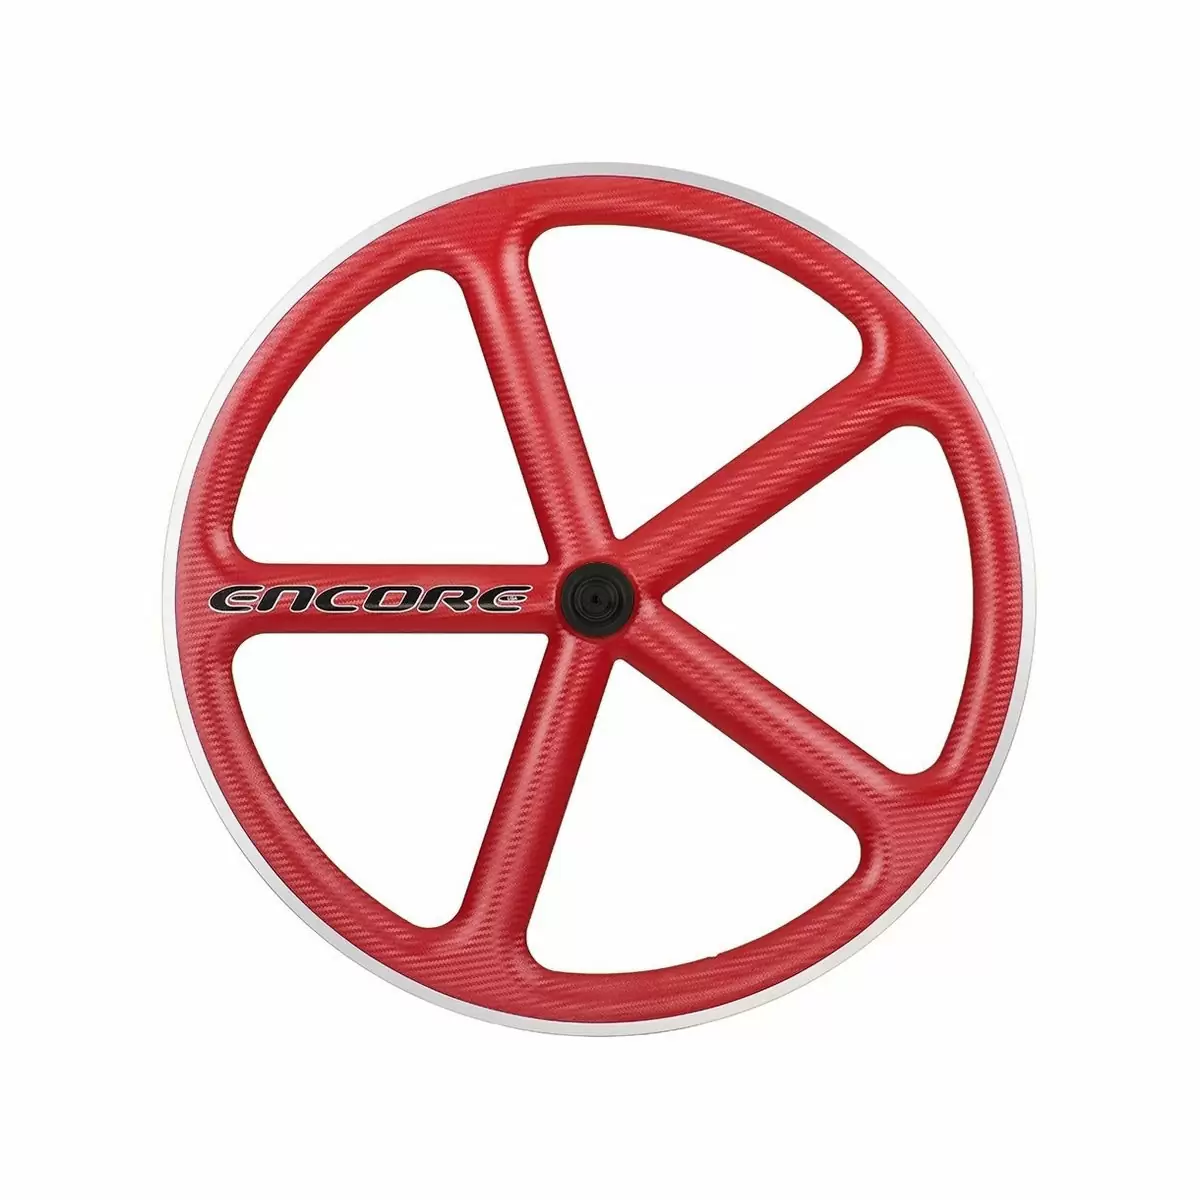 rear wheel 700c track 5 spokes carbon weave red msw - image